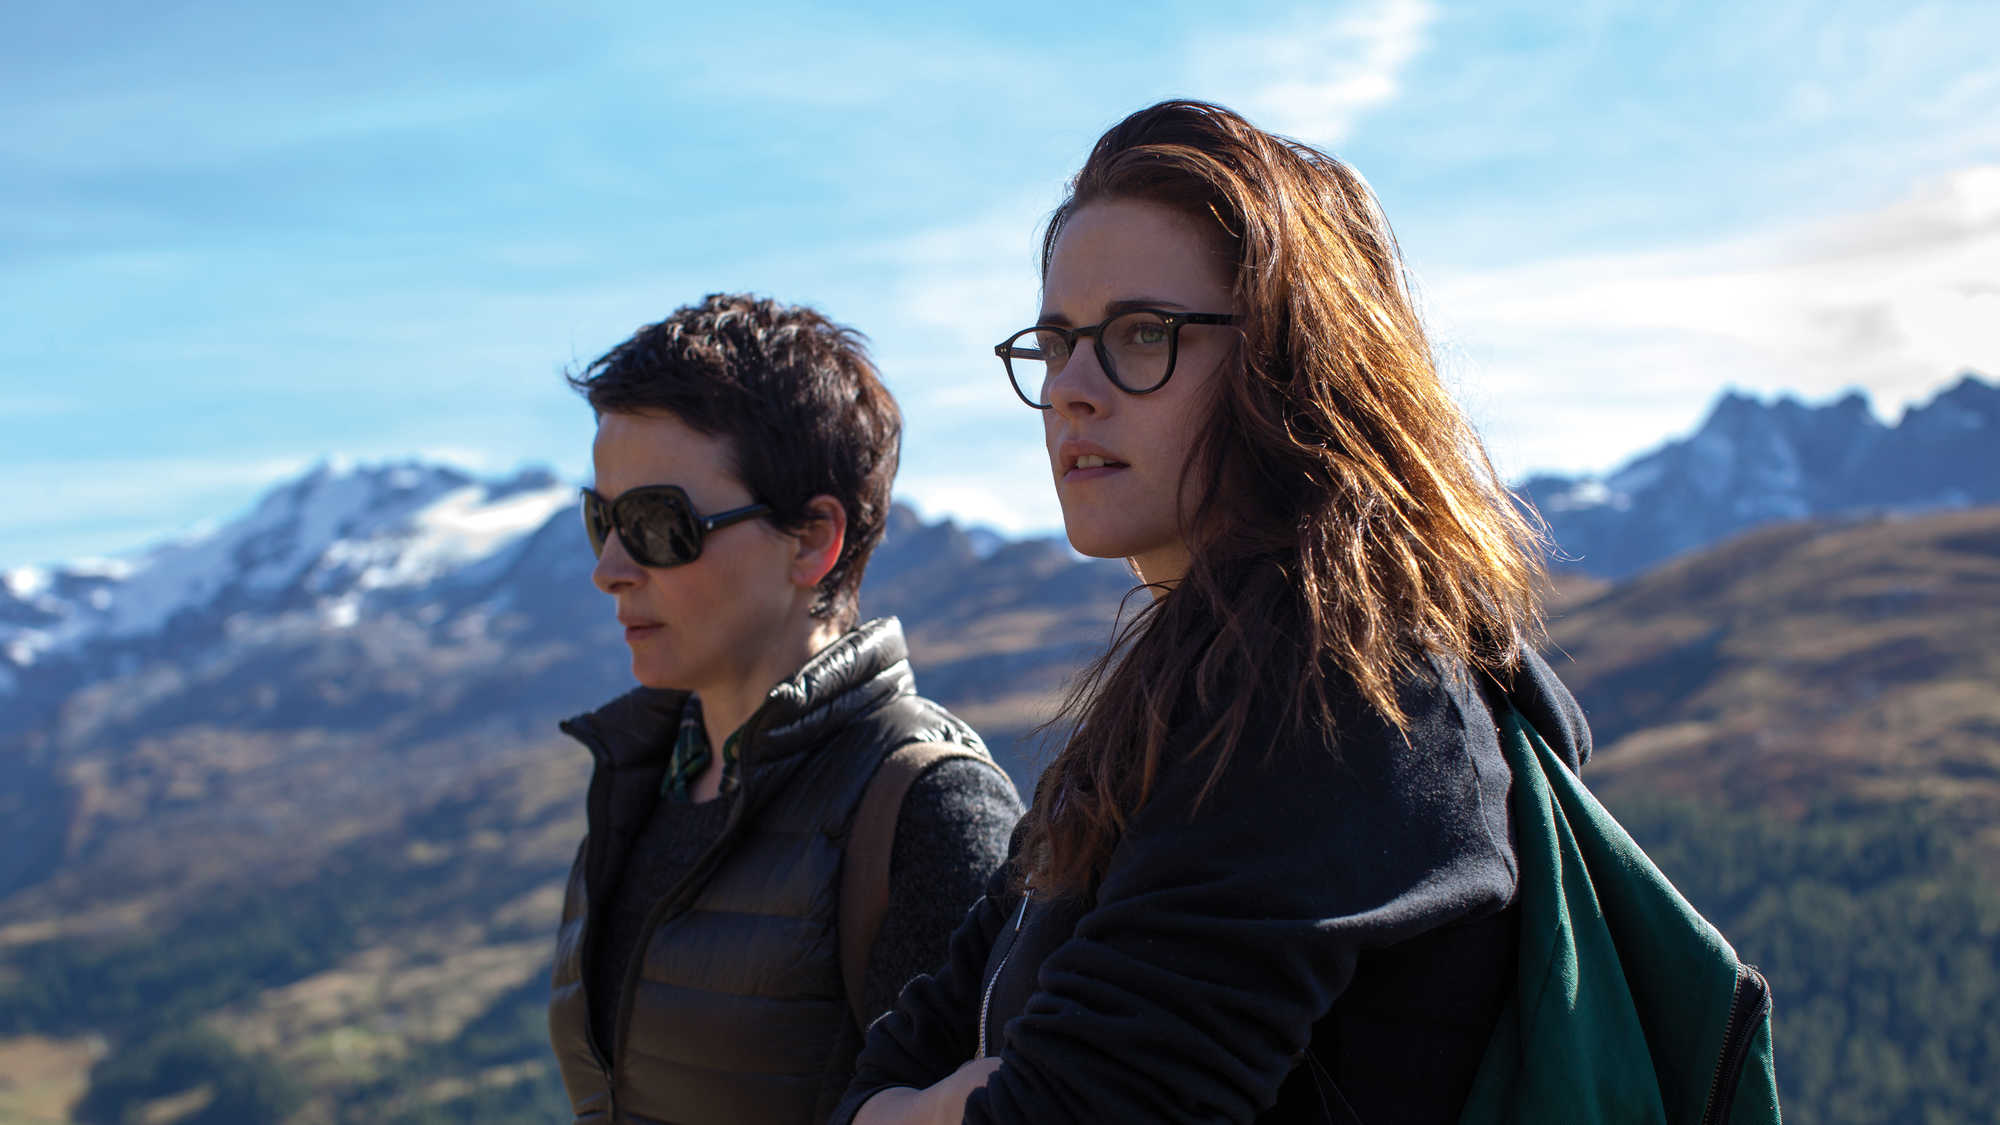 Image result for clouds of sils maria